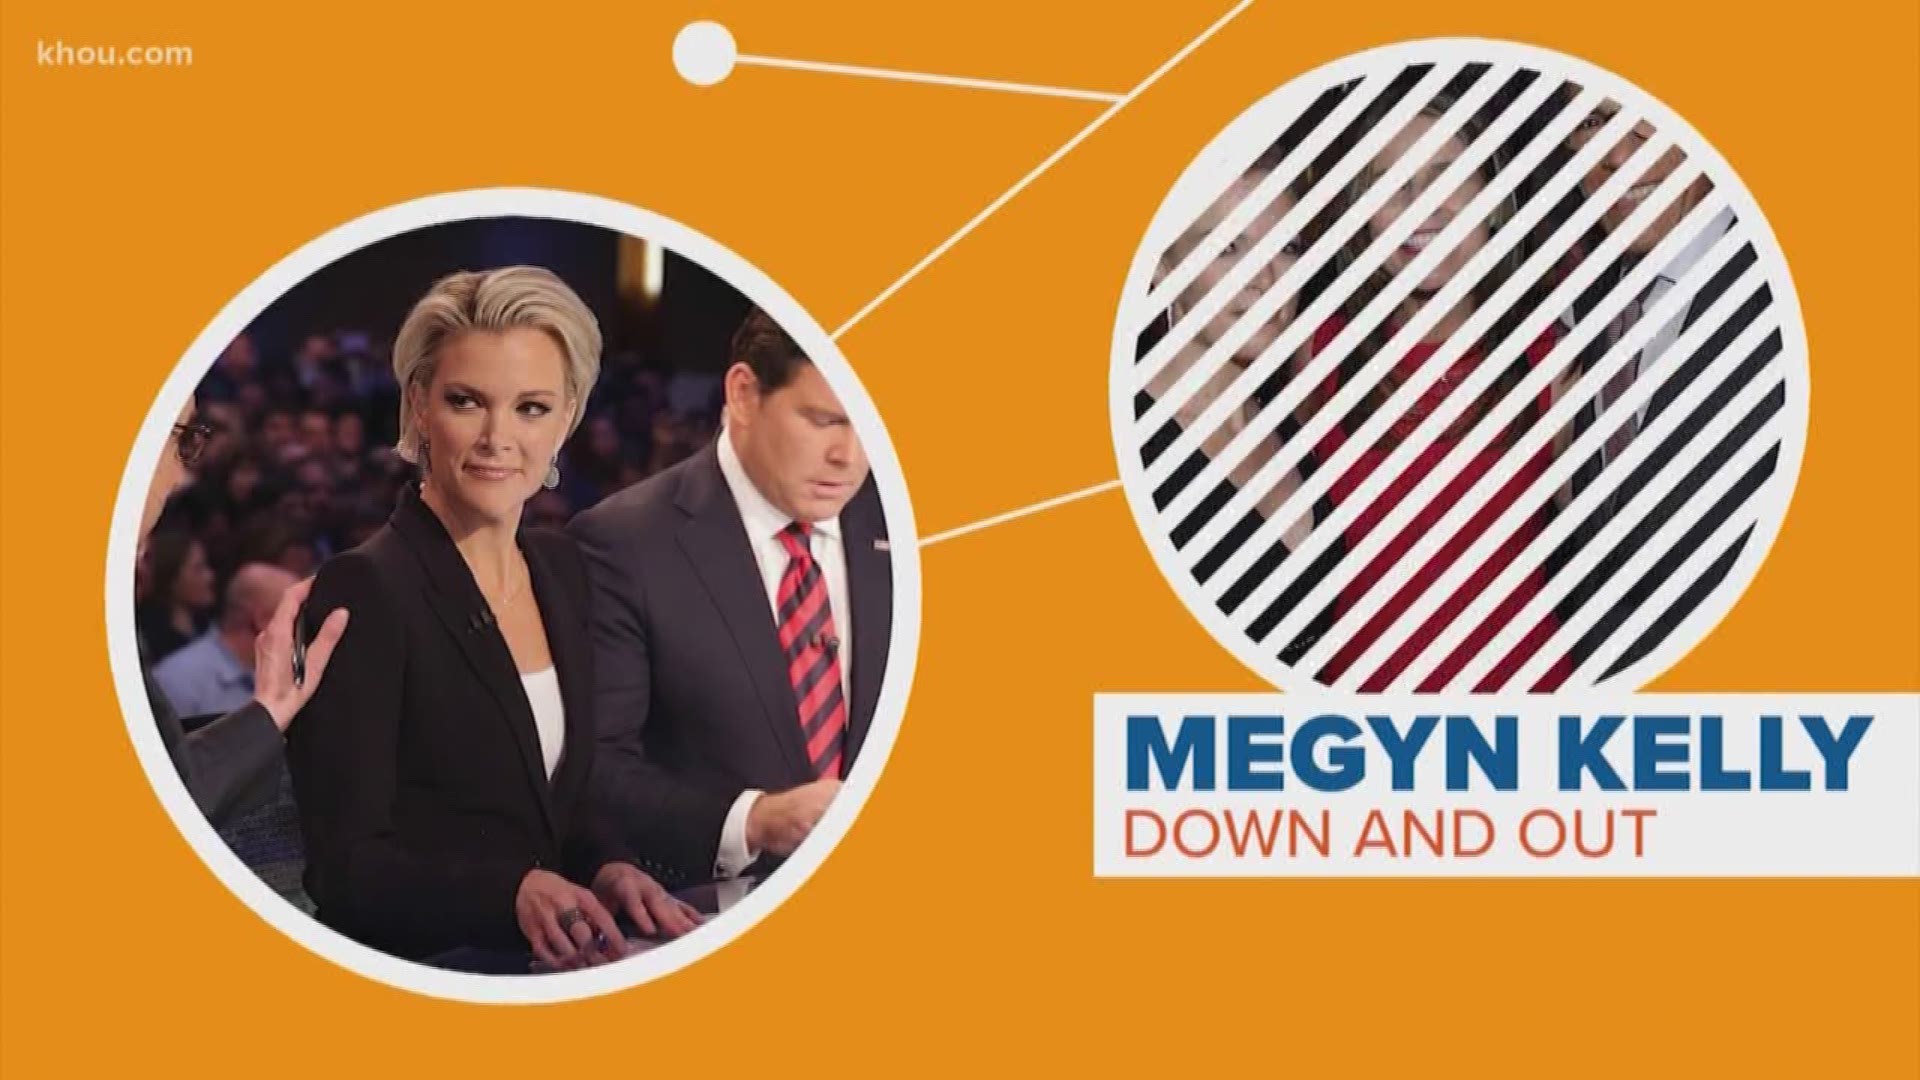 Several news outlets are reporting that Megyn Kelly is negotiating her exit from NBC. Janel Bludau explains what led up to this high profile decline.